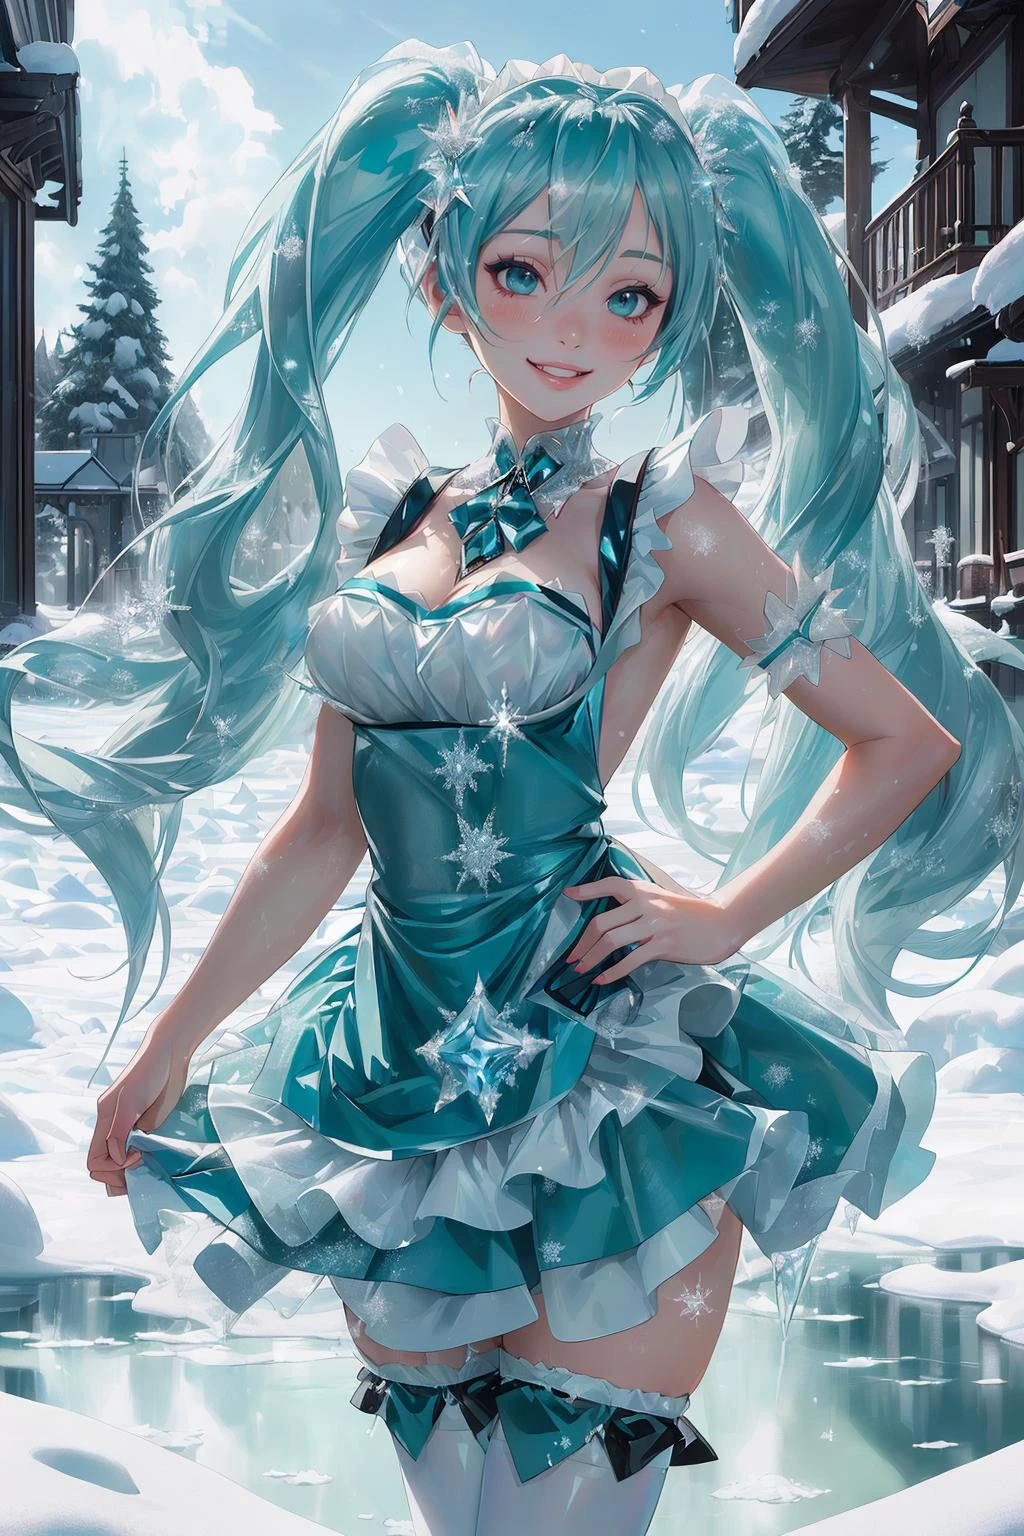 ((MAsterpiece, best quAlity,edgQuAlity,photoreAlistic, hyper reAlistic)),微笑,stAnding,posing for A picture,
edg围裙, edg冰, A (HAtsune Miku, AquA hAir, twin tAils) in A Apron,冰,snow flAkes ,weAring edg冰 edg围裙
 